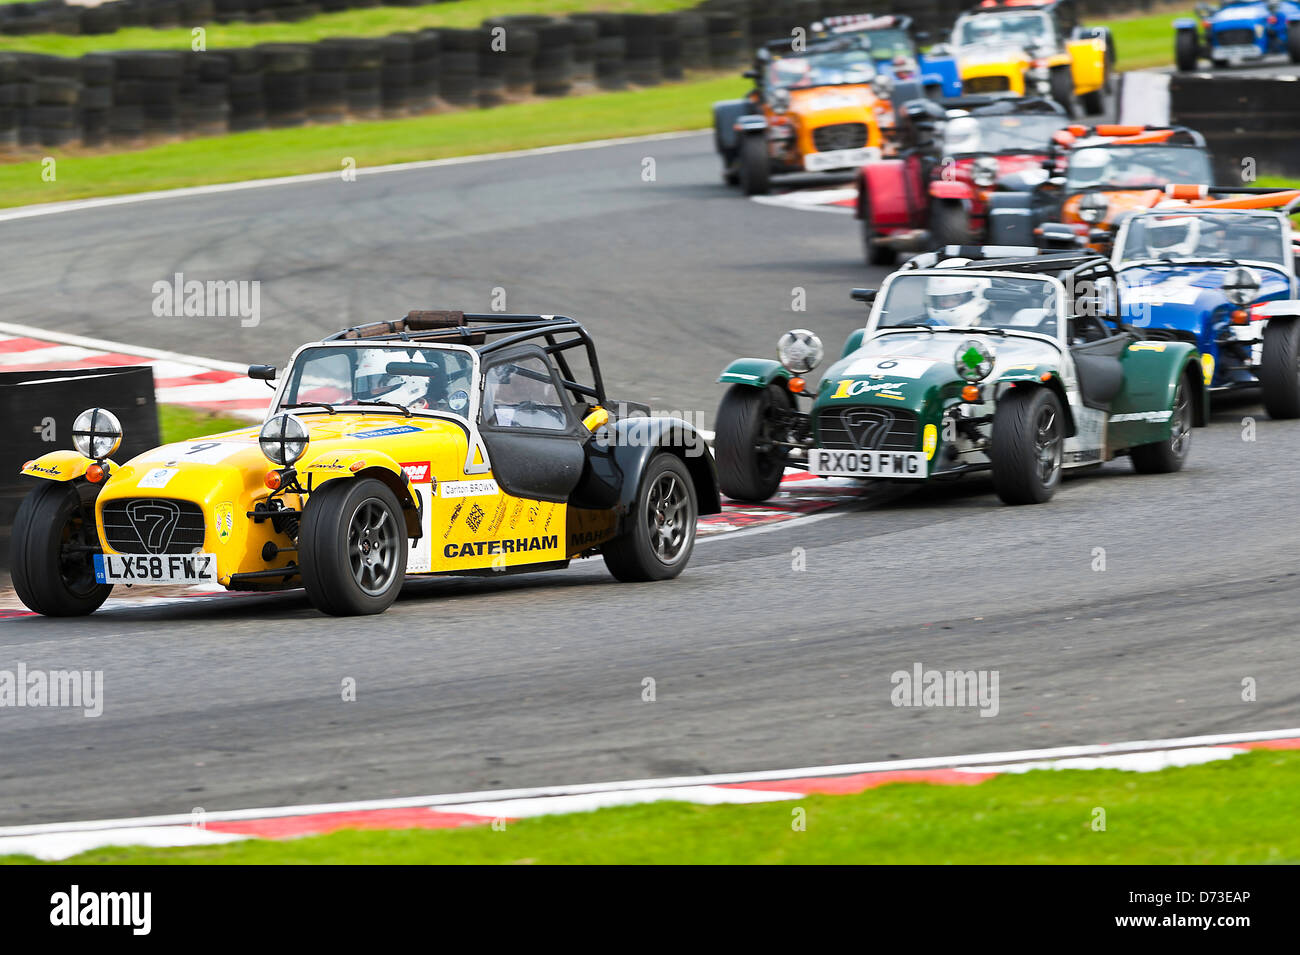 Caterham Roadsport Racing Cars Competing at Oulton Park Motor Racing Circuit Cheshire England United Kingdom UK Stock Photo